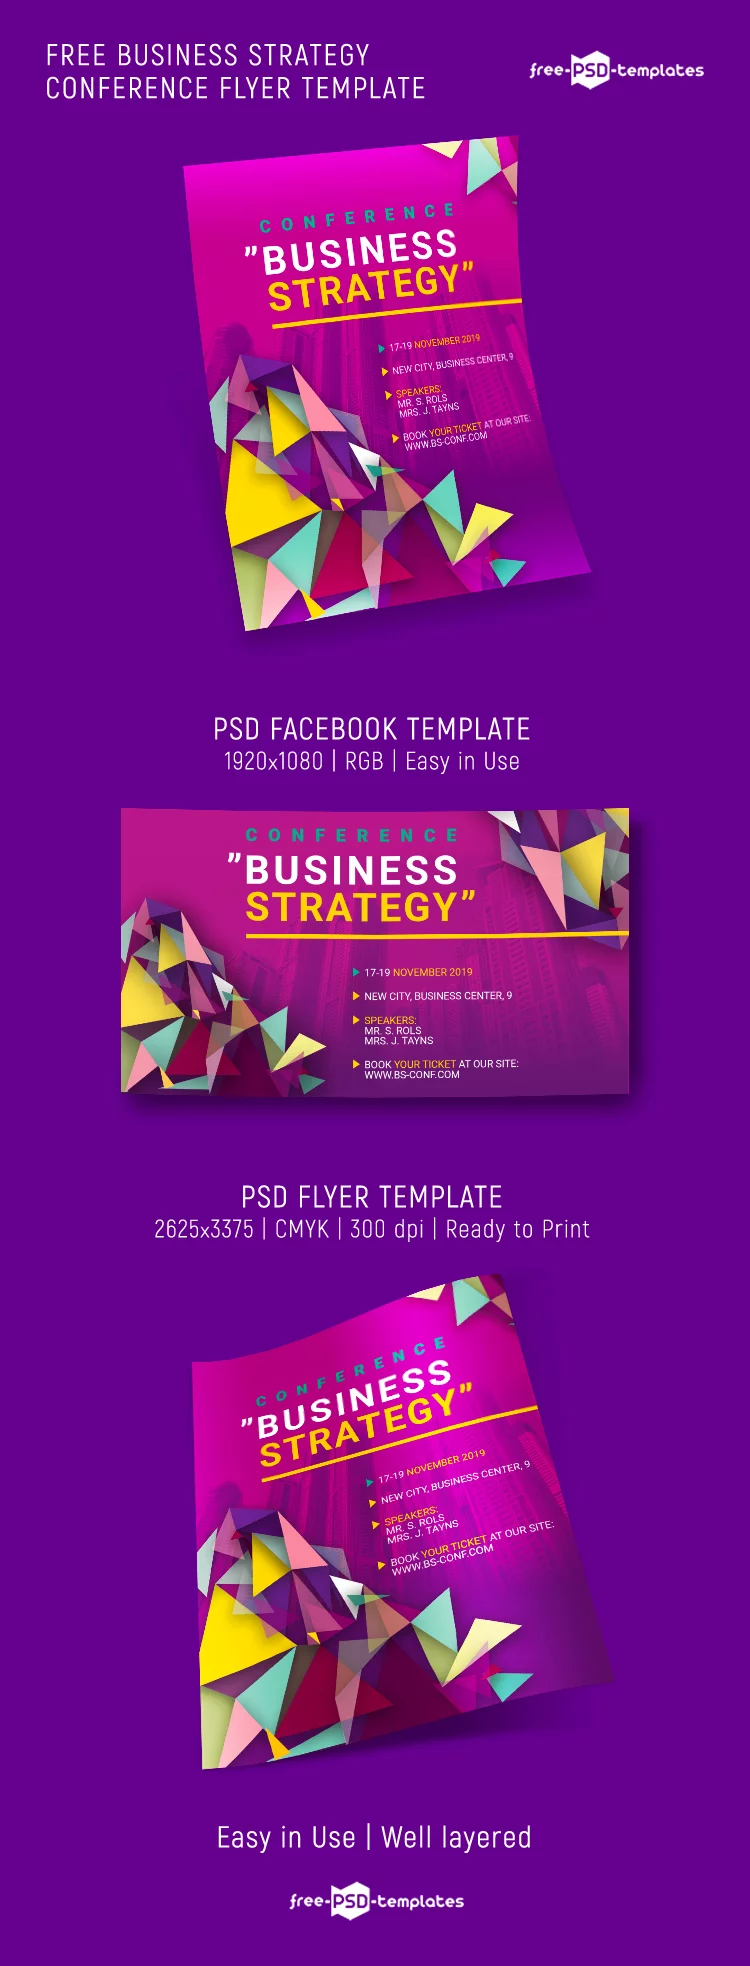 Free Business Strategy Conference Flyer Template